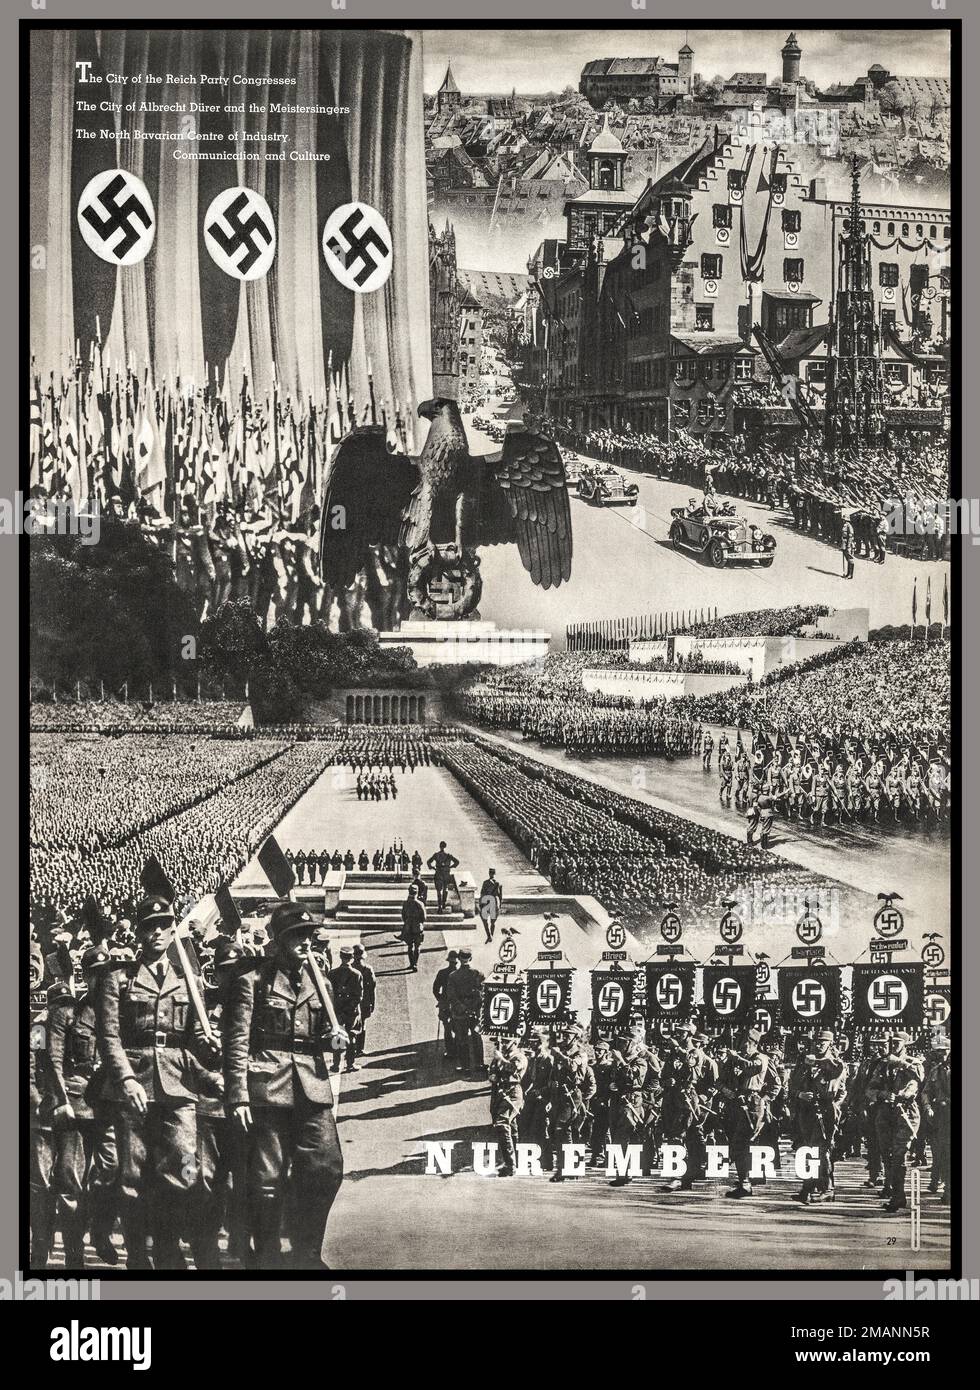 Nazi Nuremberg 1936 American Illustrated News, August-October, 1936 (Olympic number) First published soon after Adolf Hitler and the Nazi Party overthrew the Weimar Republic in 1933, American Illustrated News was a state-sponsored German publication 'designed to be circulated abroad in German interests,' according to an April 19, 1934 article in the New York Times titled 'Says German Organ Aim to Spur Travel, Bergmann, Editor, Asserts the American Illustrated News Is Not for Propaganda.' Date 1936 Stock Photo